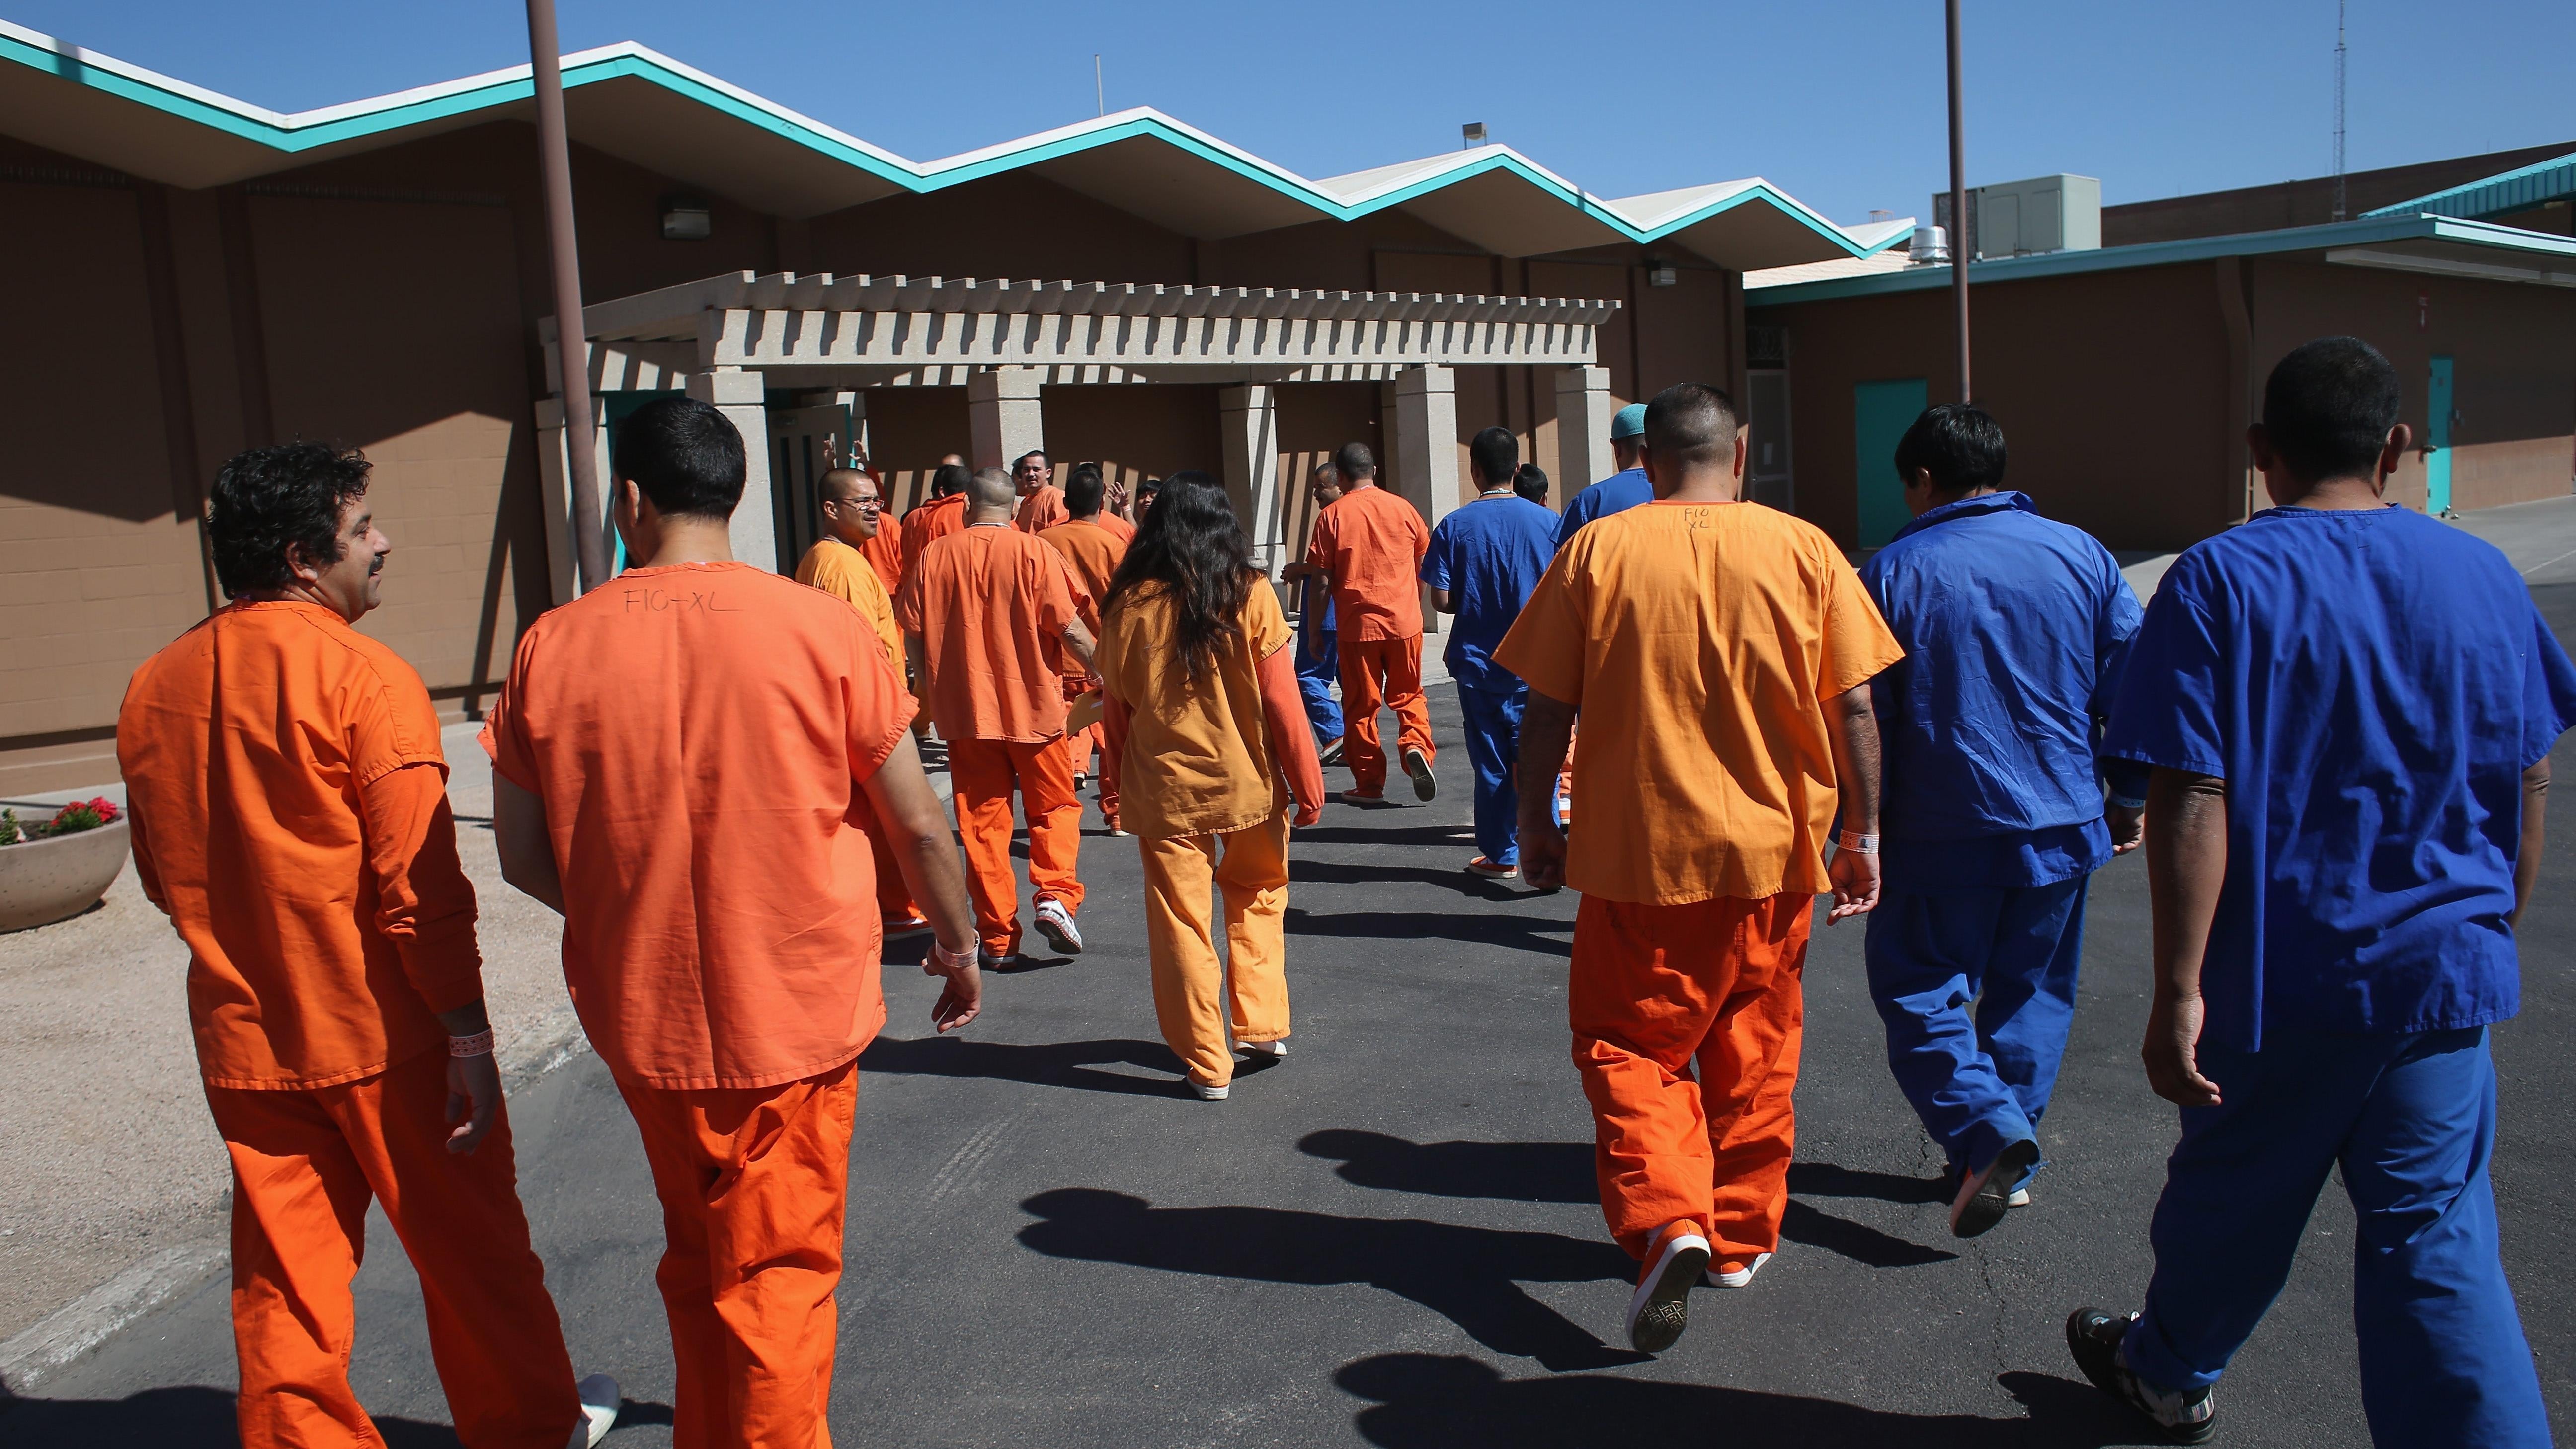  Immigrant detainees walk through the Immigration and Customs Enforcement (ICE), detention facility on February 28, 2013 in Florence, Arizon (Photo: John Moore, Getty Images)